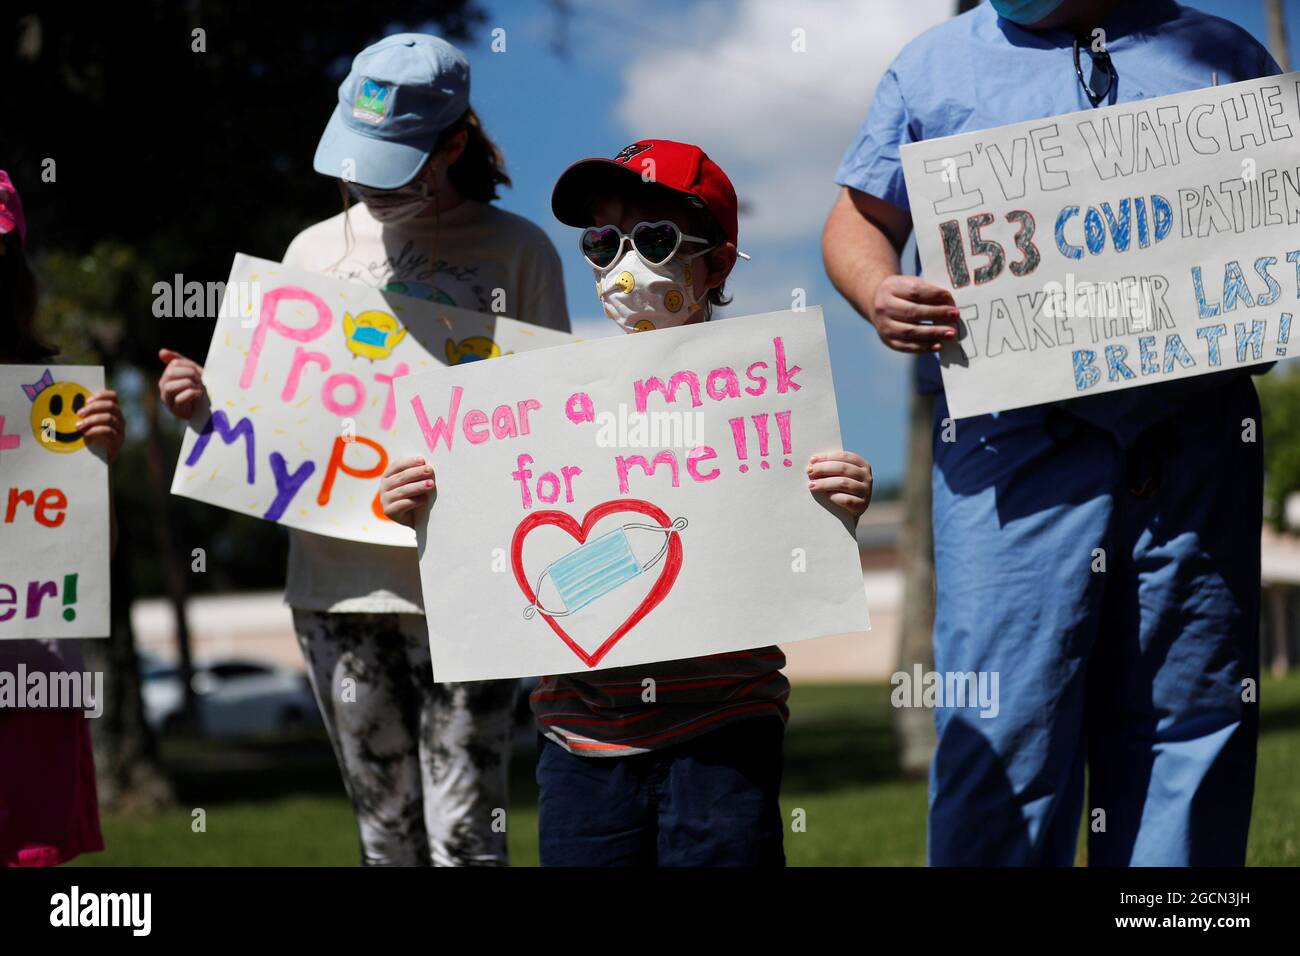 Supporters of wearing masks in schools Sofia Deyo 11, and her brother Matthew Deyo 6, protest before the special called school board workshop at the Pinellas County Schools Administration Building in Largo, Florida, U.S., August 9, 2021. REUTERS/Octavio Jones Stock Photo